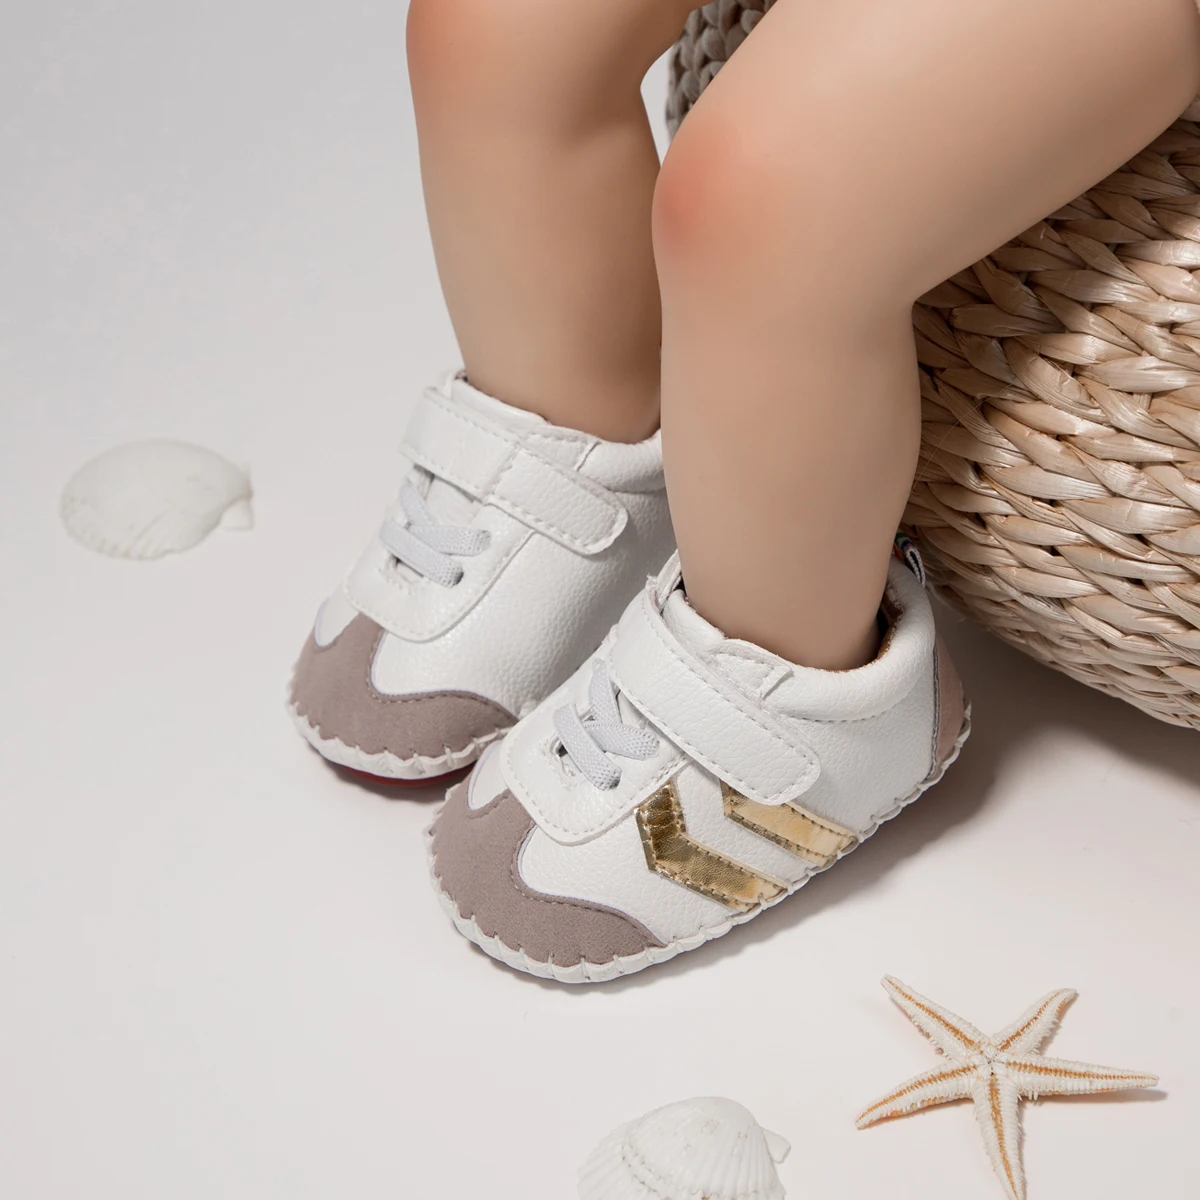 MOQ 12 Fashion Style Anti-slip Sneakers Bright PU Leather Hard-Wearing Rubber Soft Sole Baby Shoes Rubber Sole